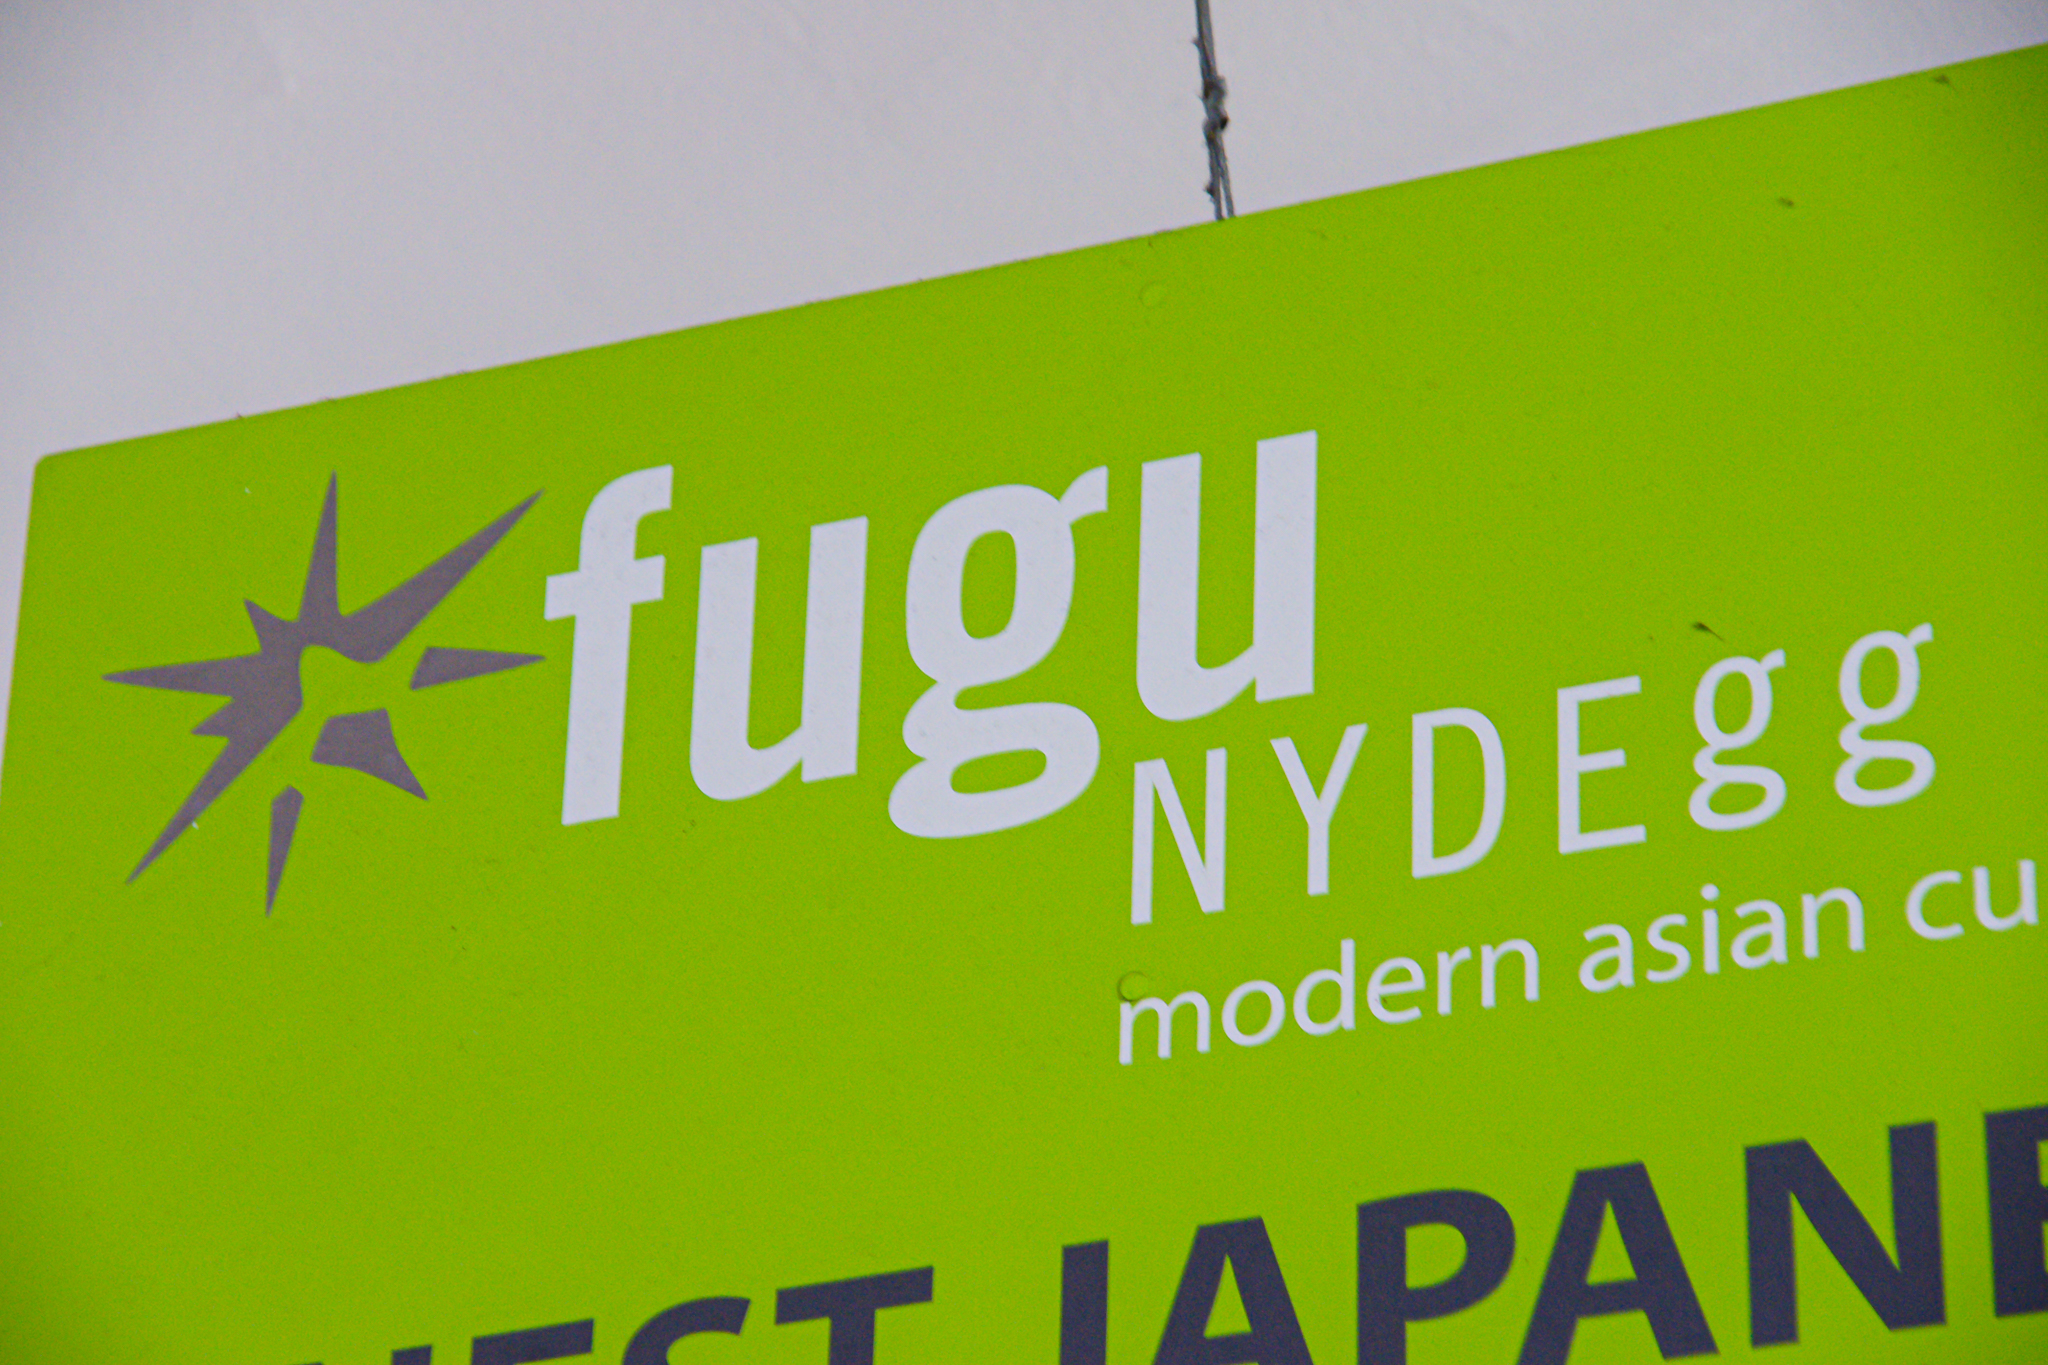 You are currently viewing Restaurant Fugu Nydegg